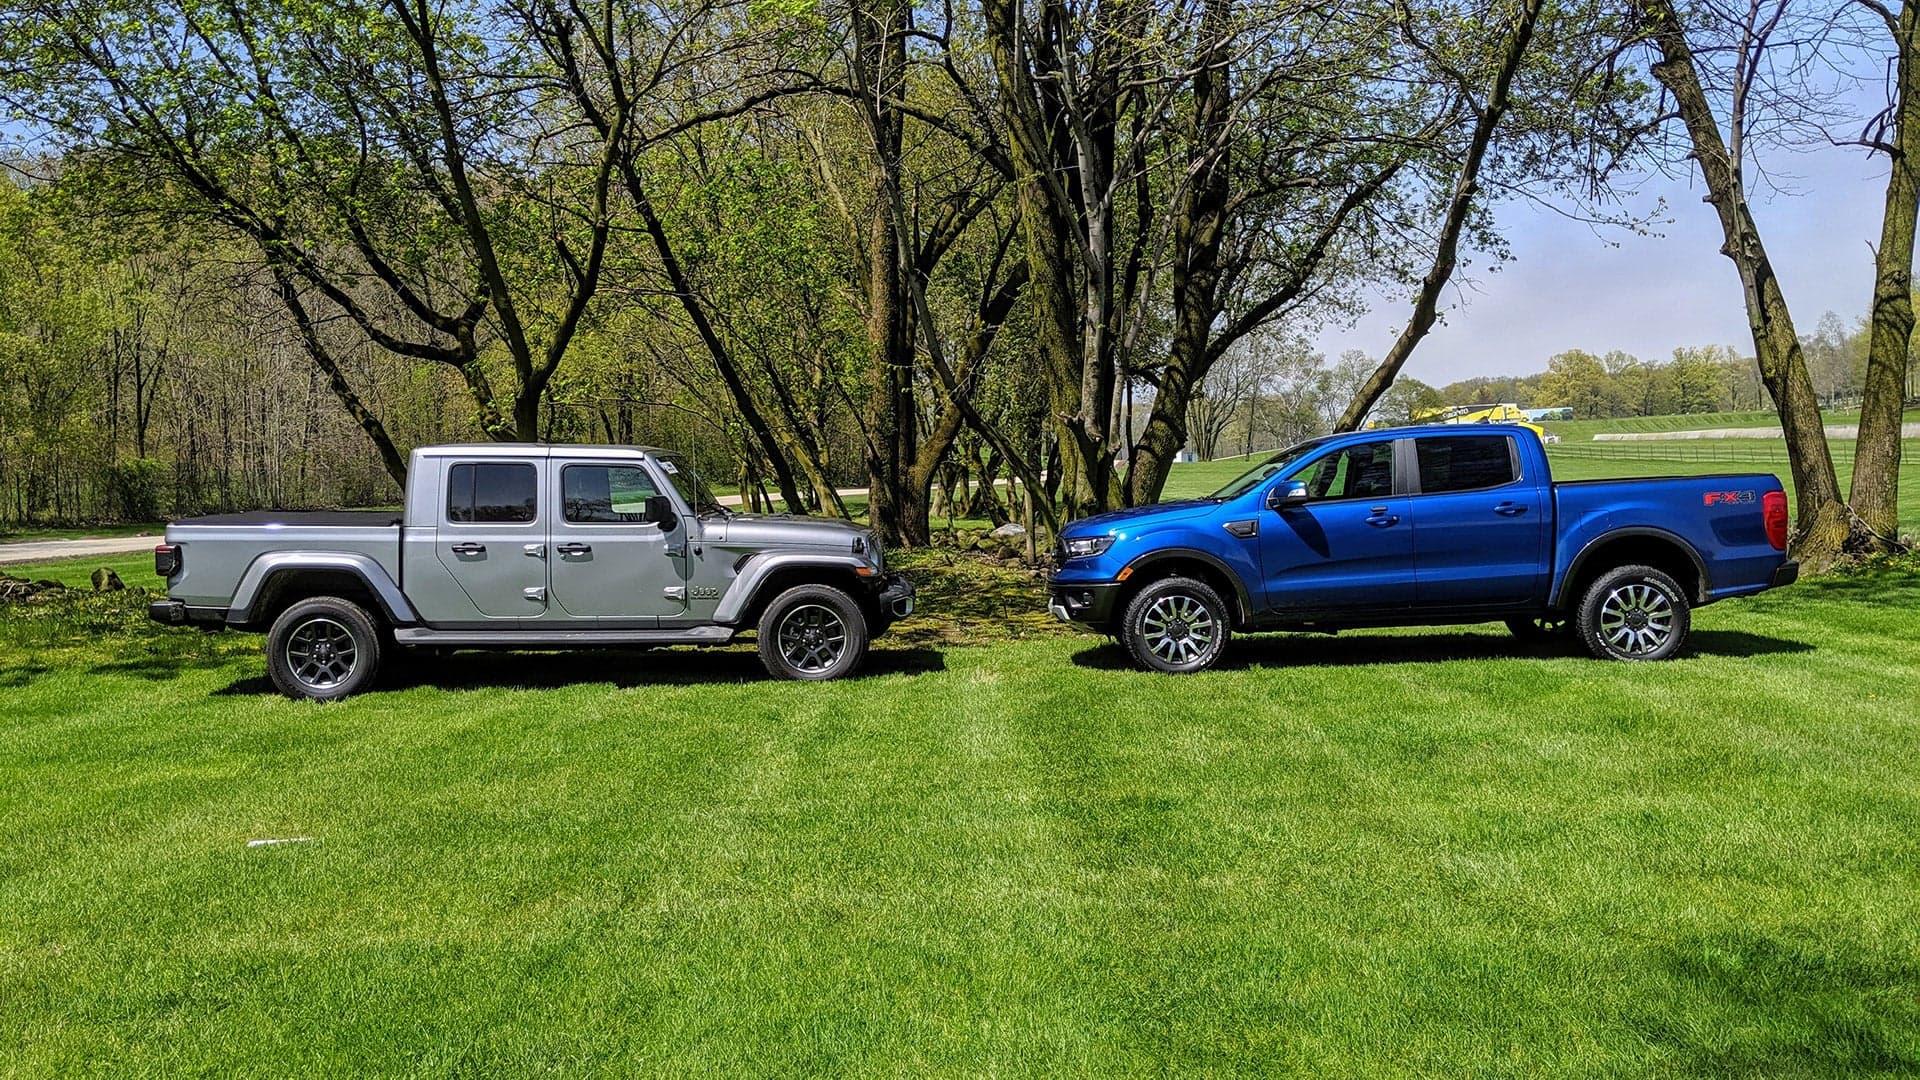 Five Key Differences Between the 2019 Ford Ranger and the 2020 Jeep Gladiator